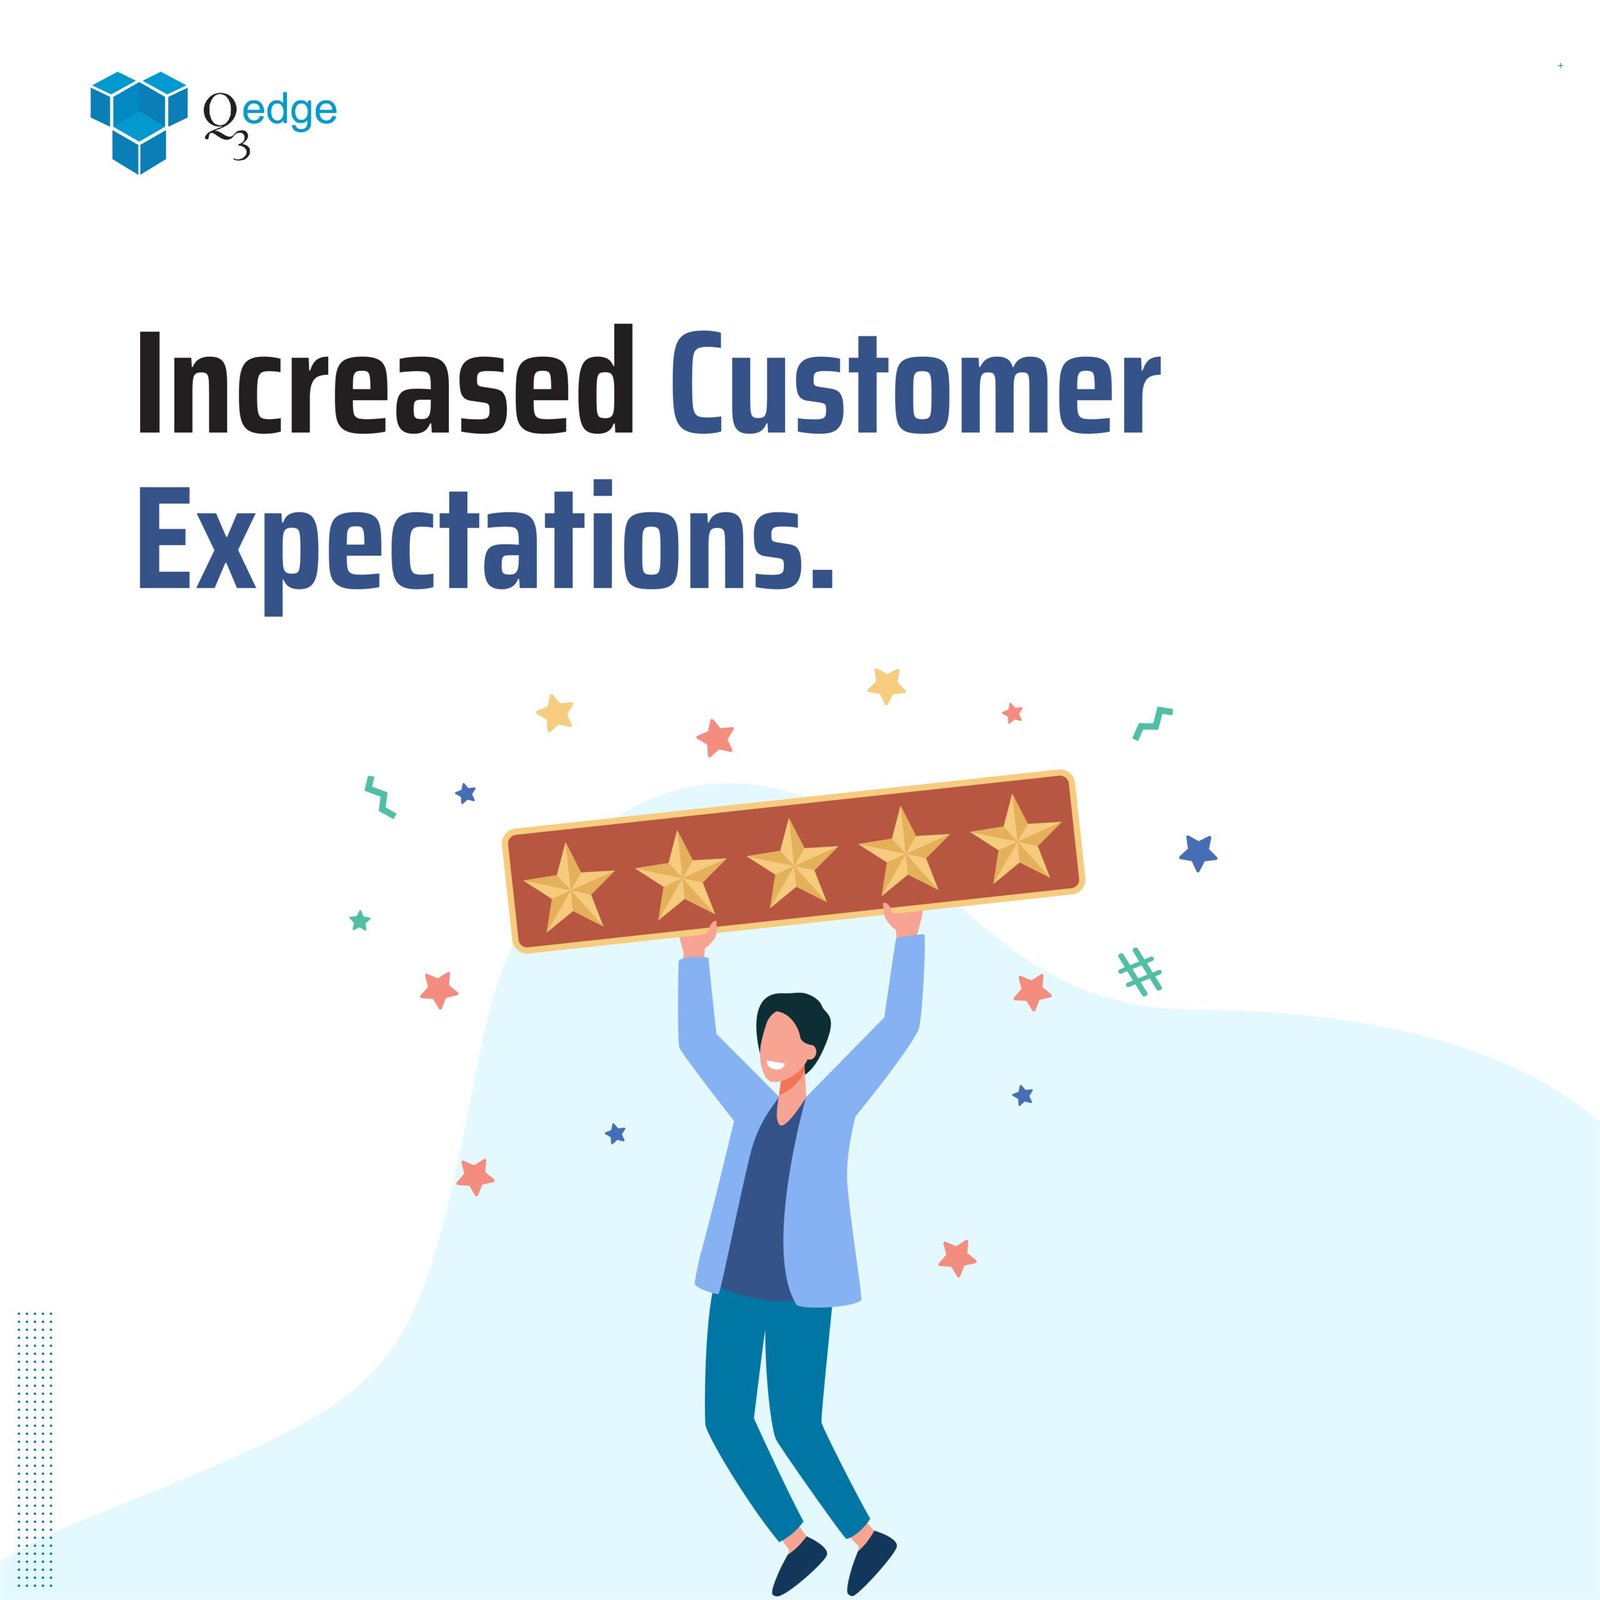 Increased Customer Expectations.